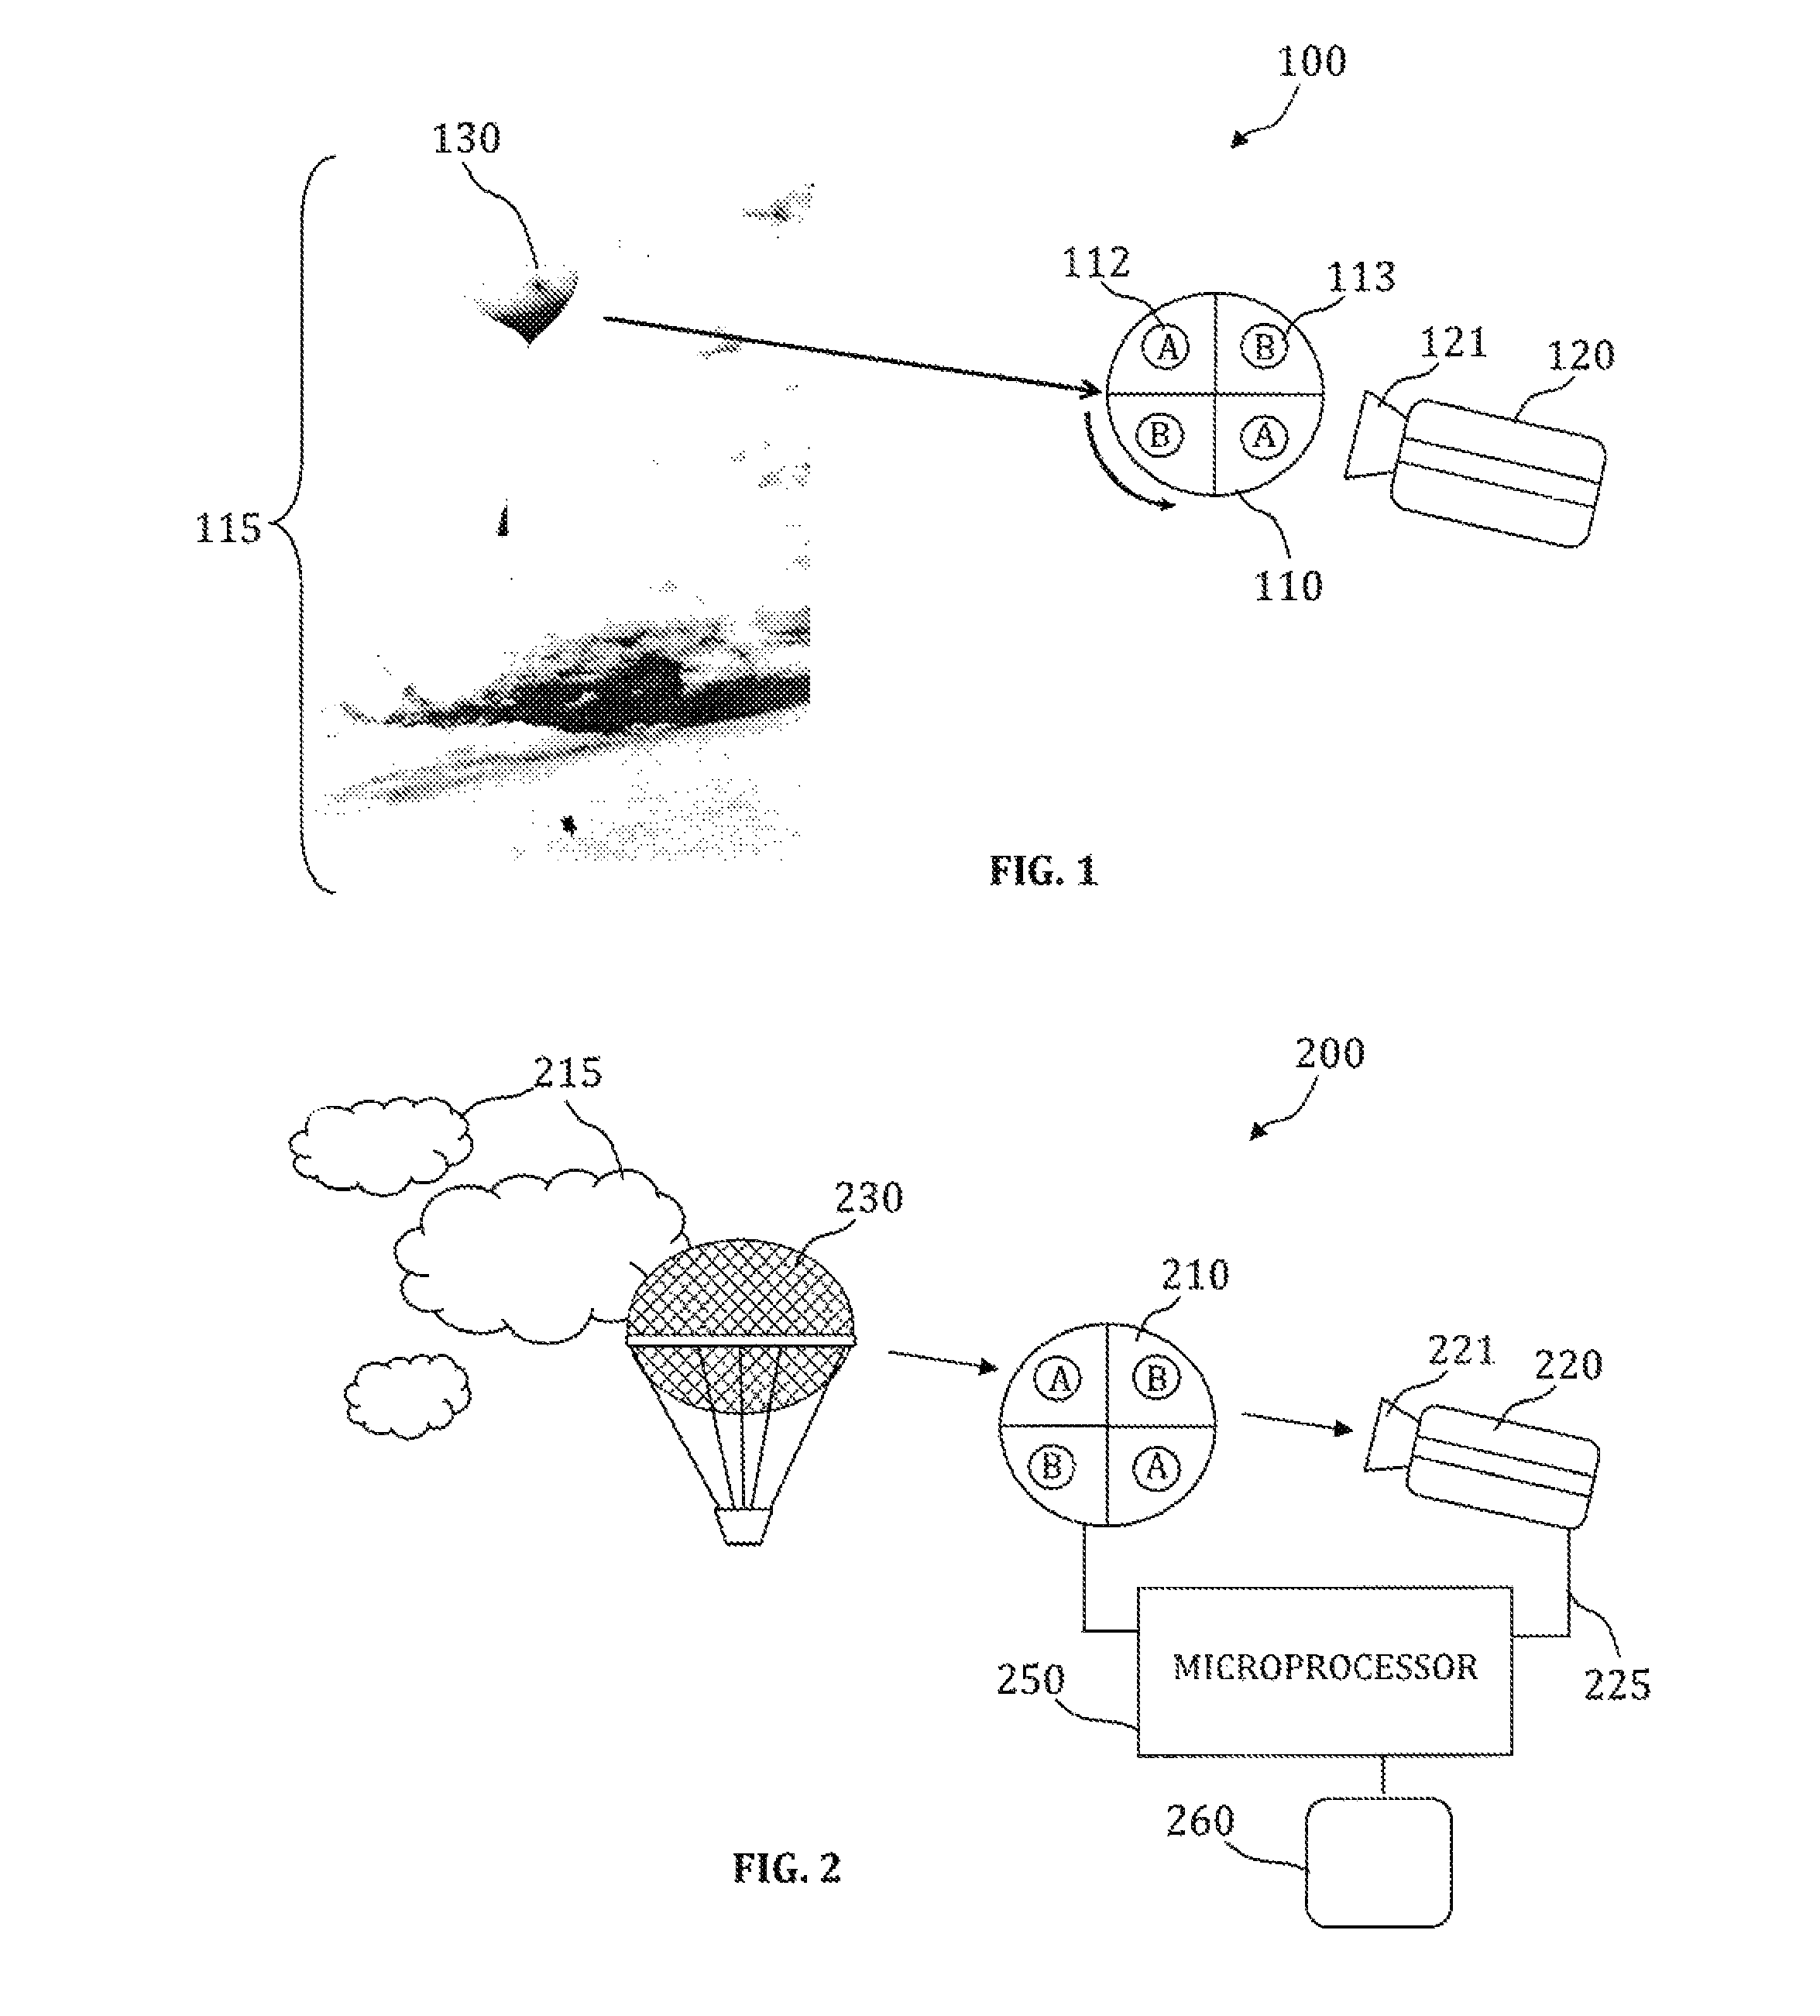 Target detection systems and methods